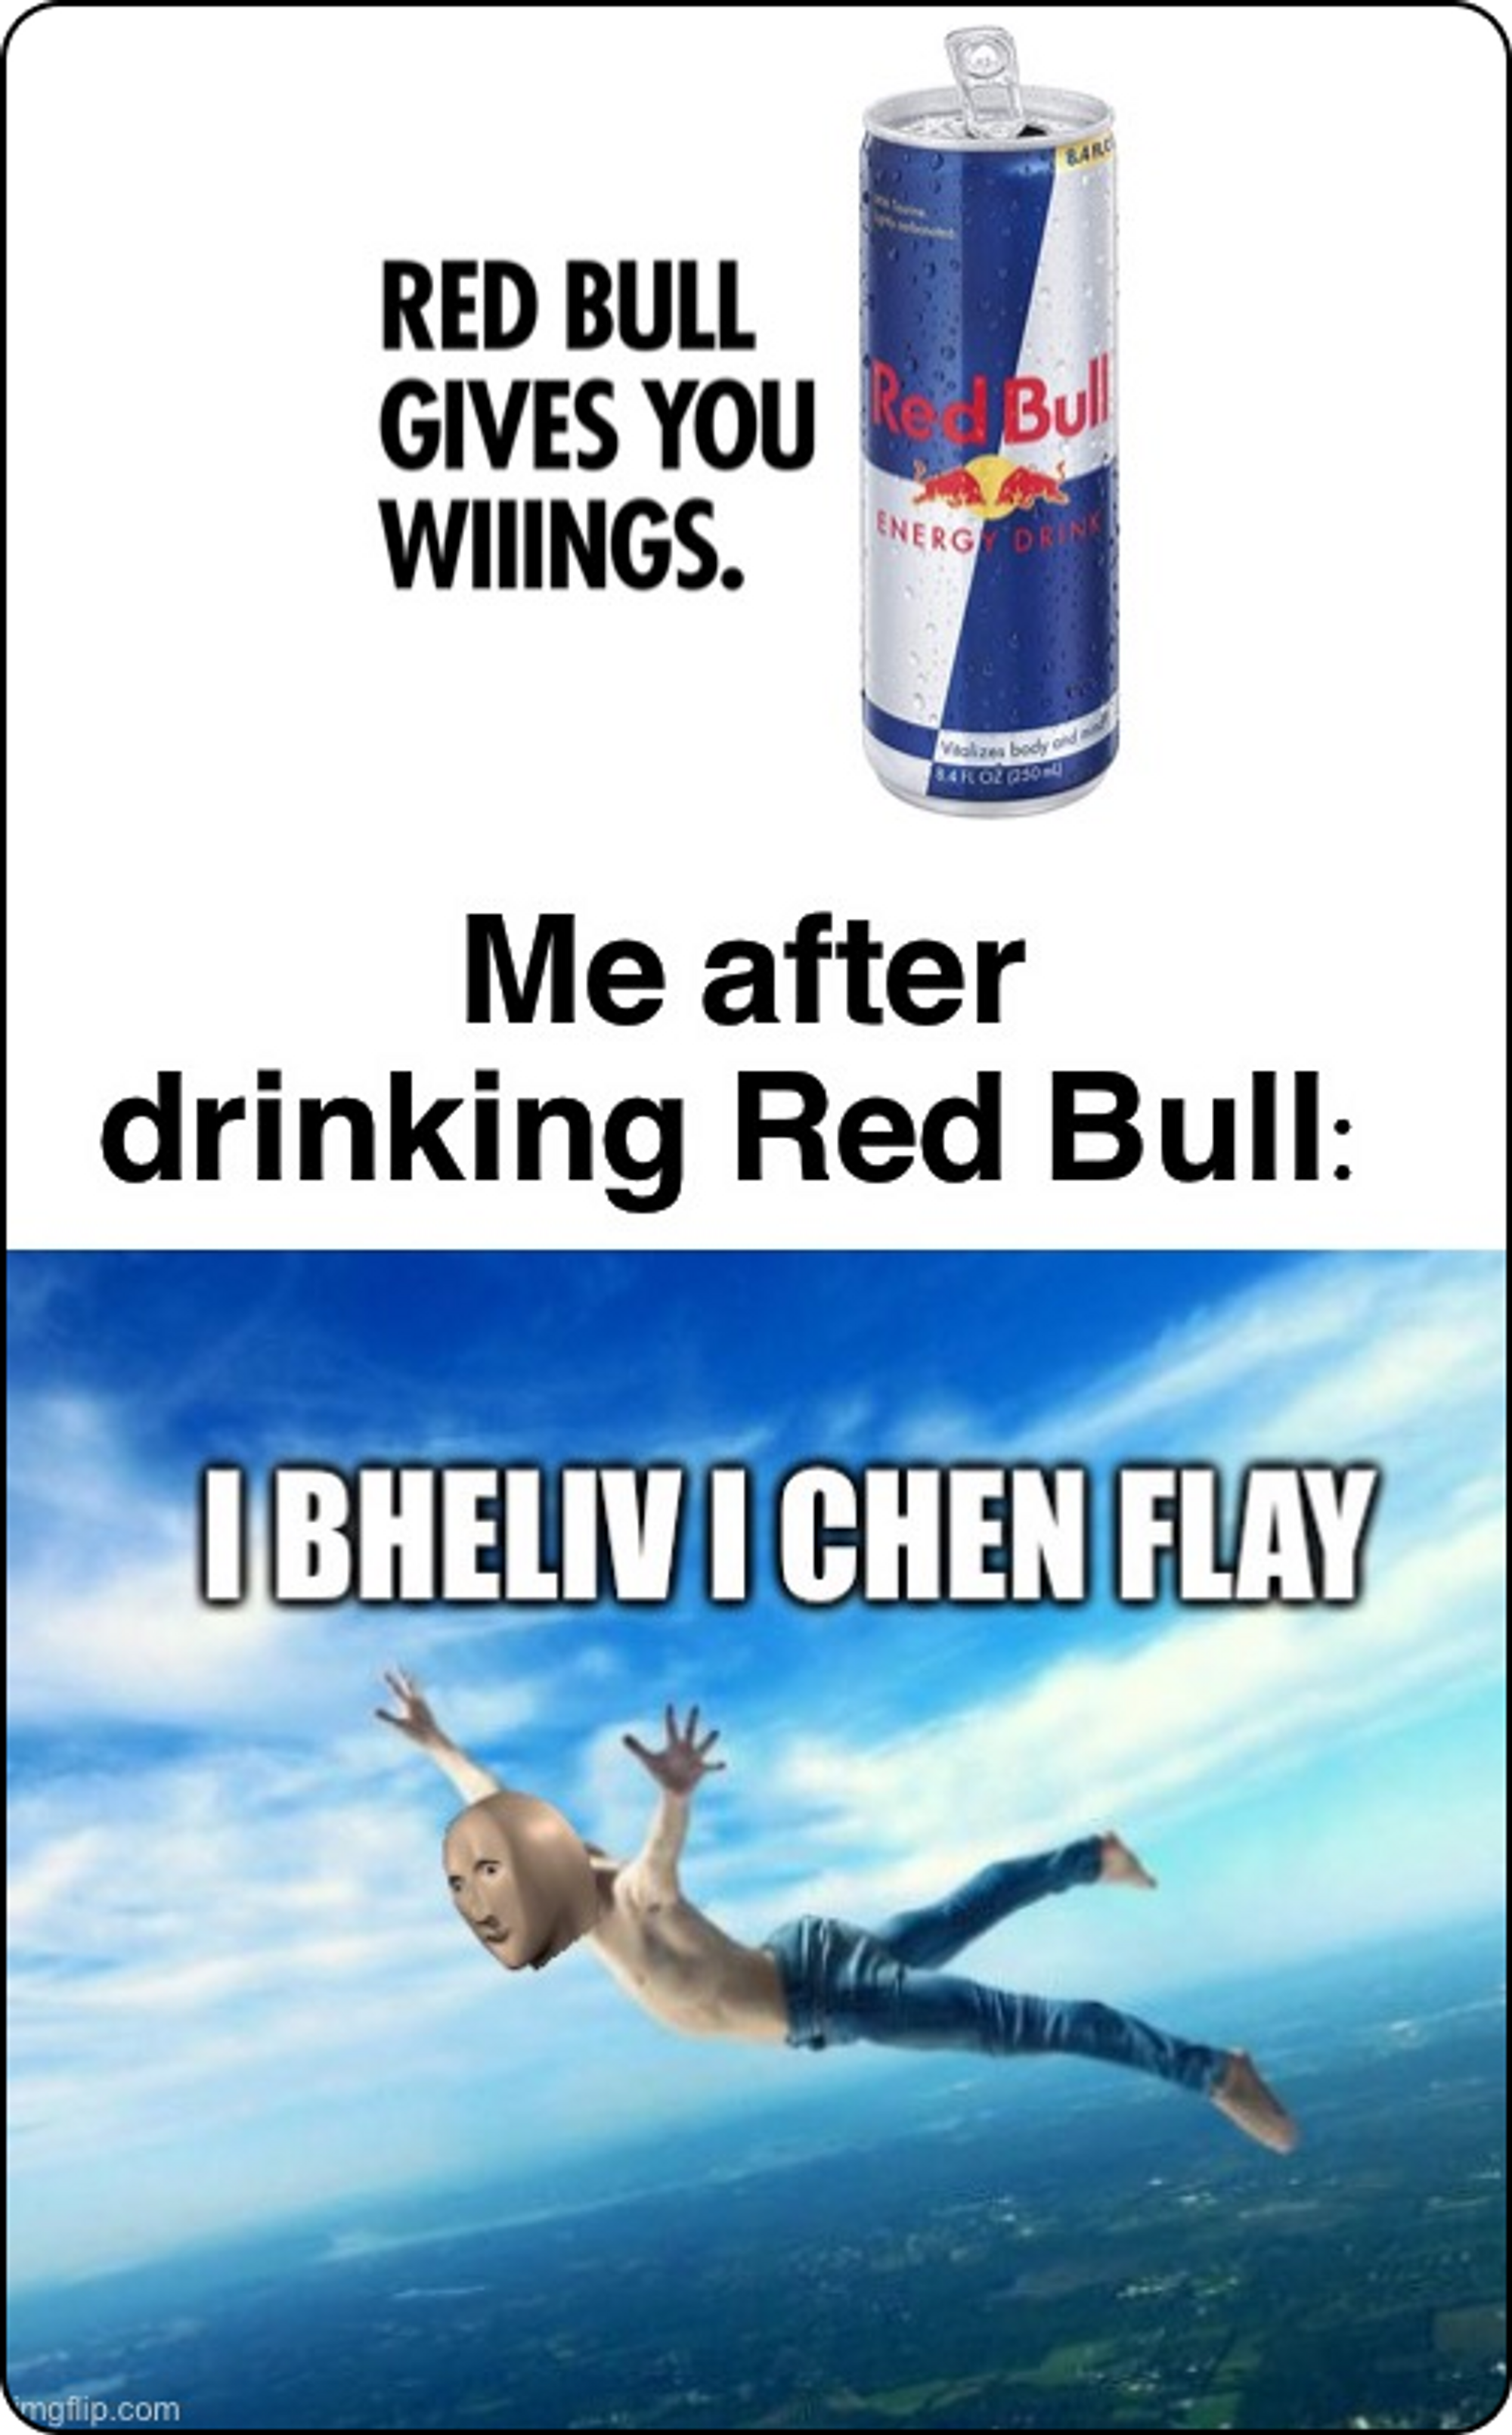 I believe I can fly with RedBull